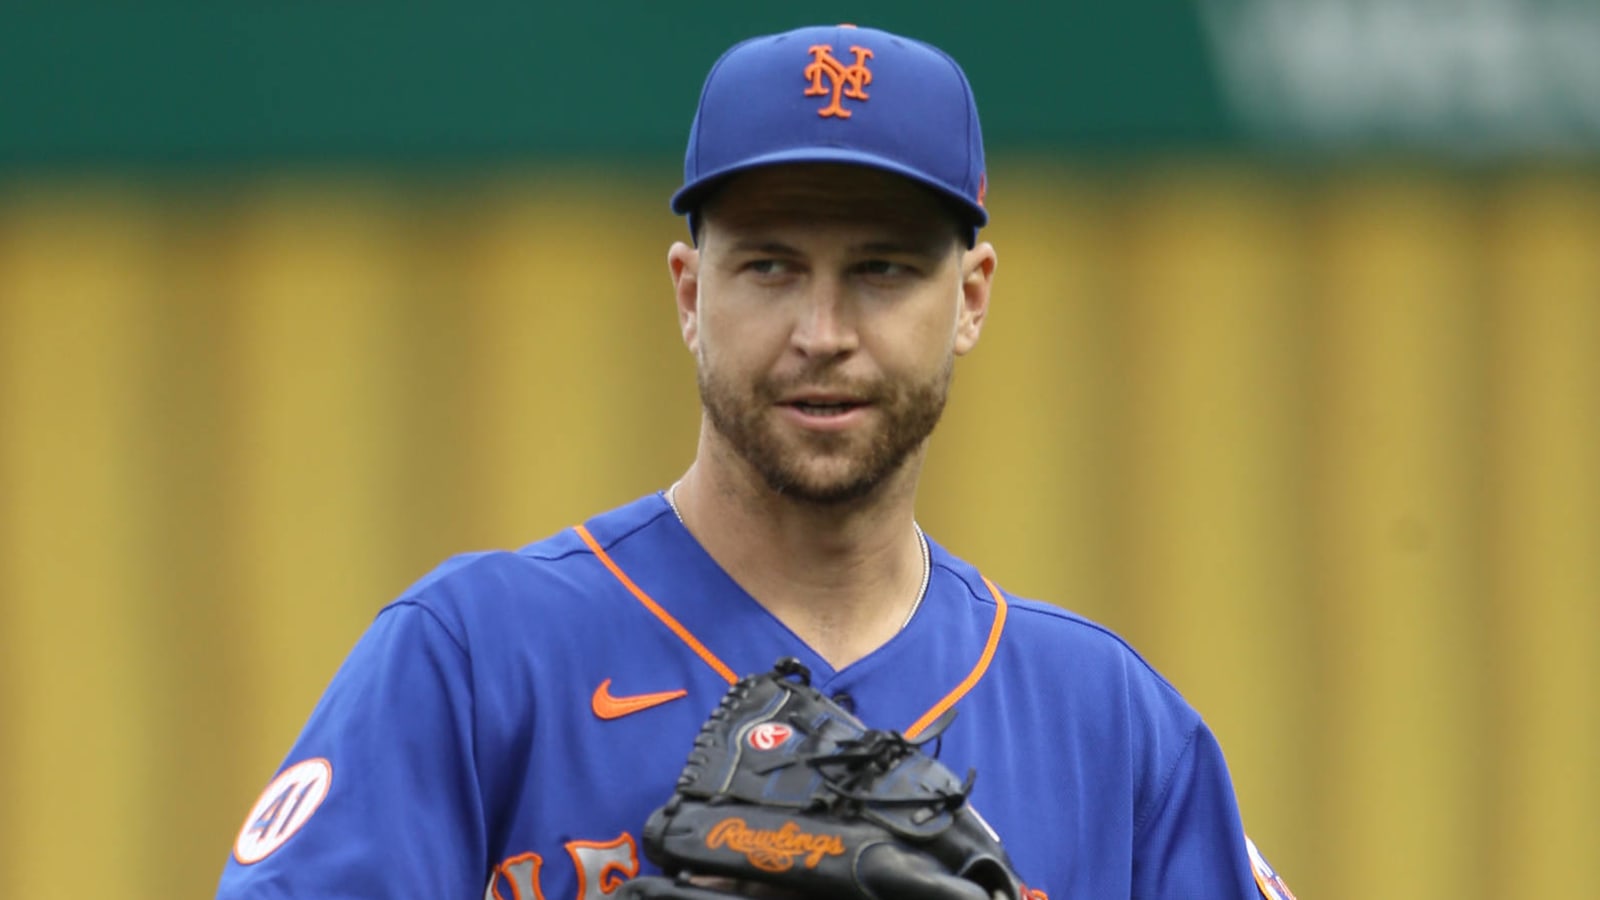 deGrom: 'No complaints' after first trip to mound in a week